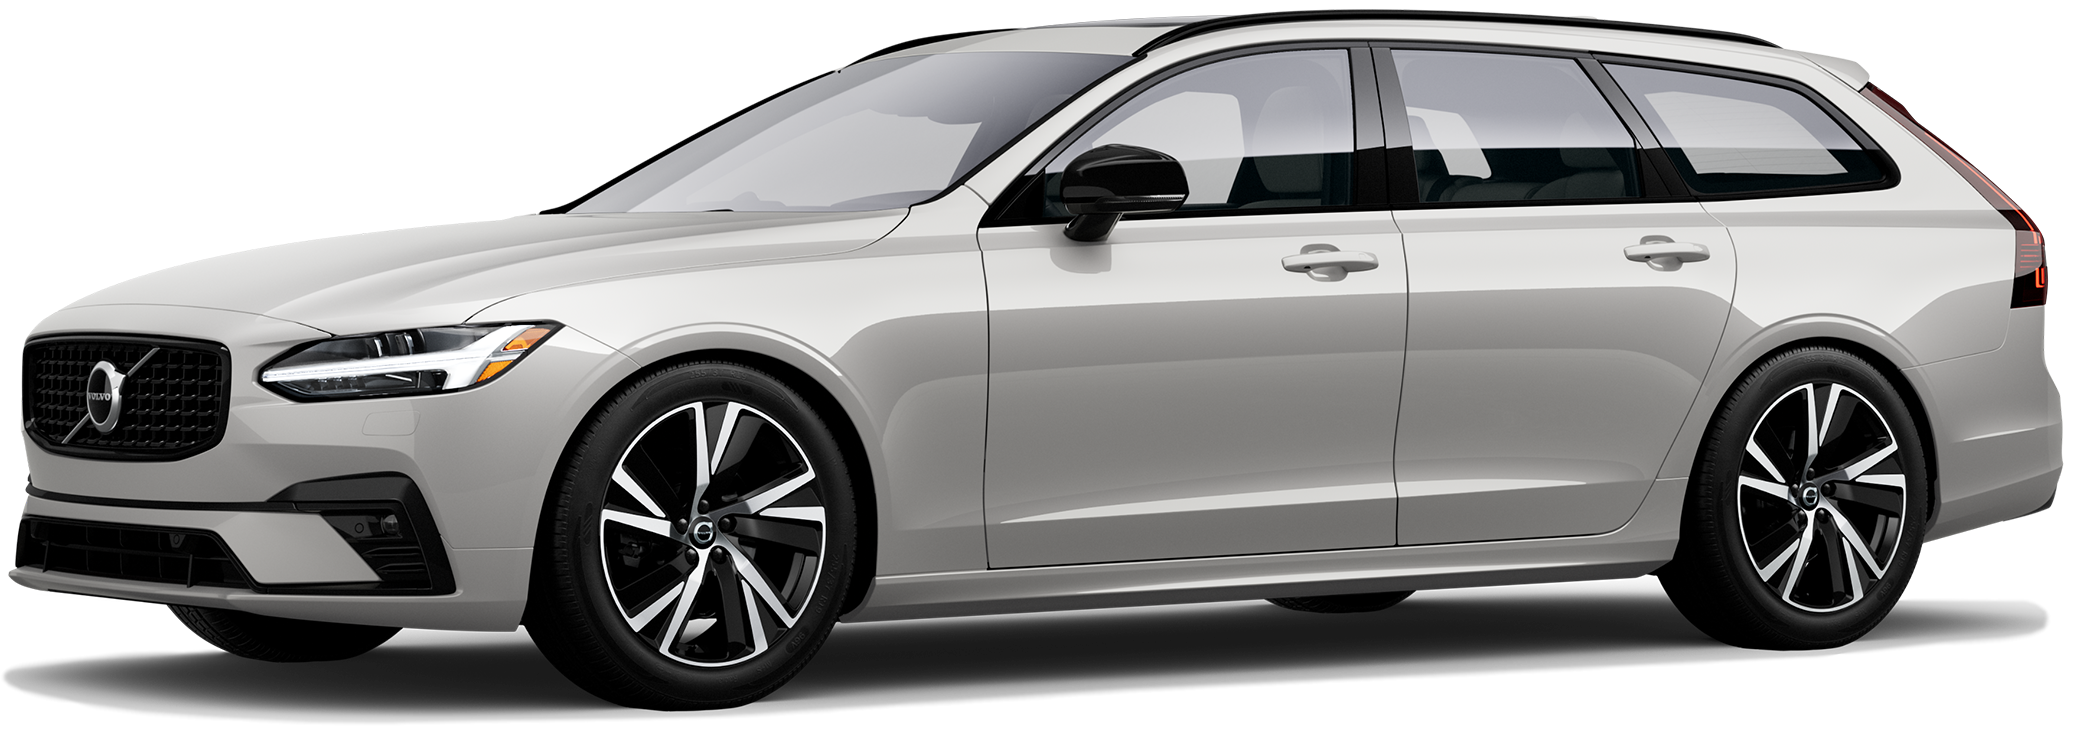 2021 Volvo V90 Incentives, Specials & Offers in Madison WI